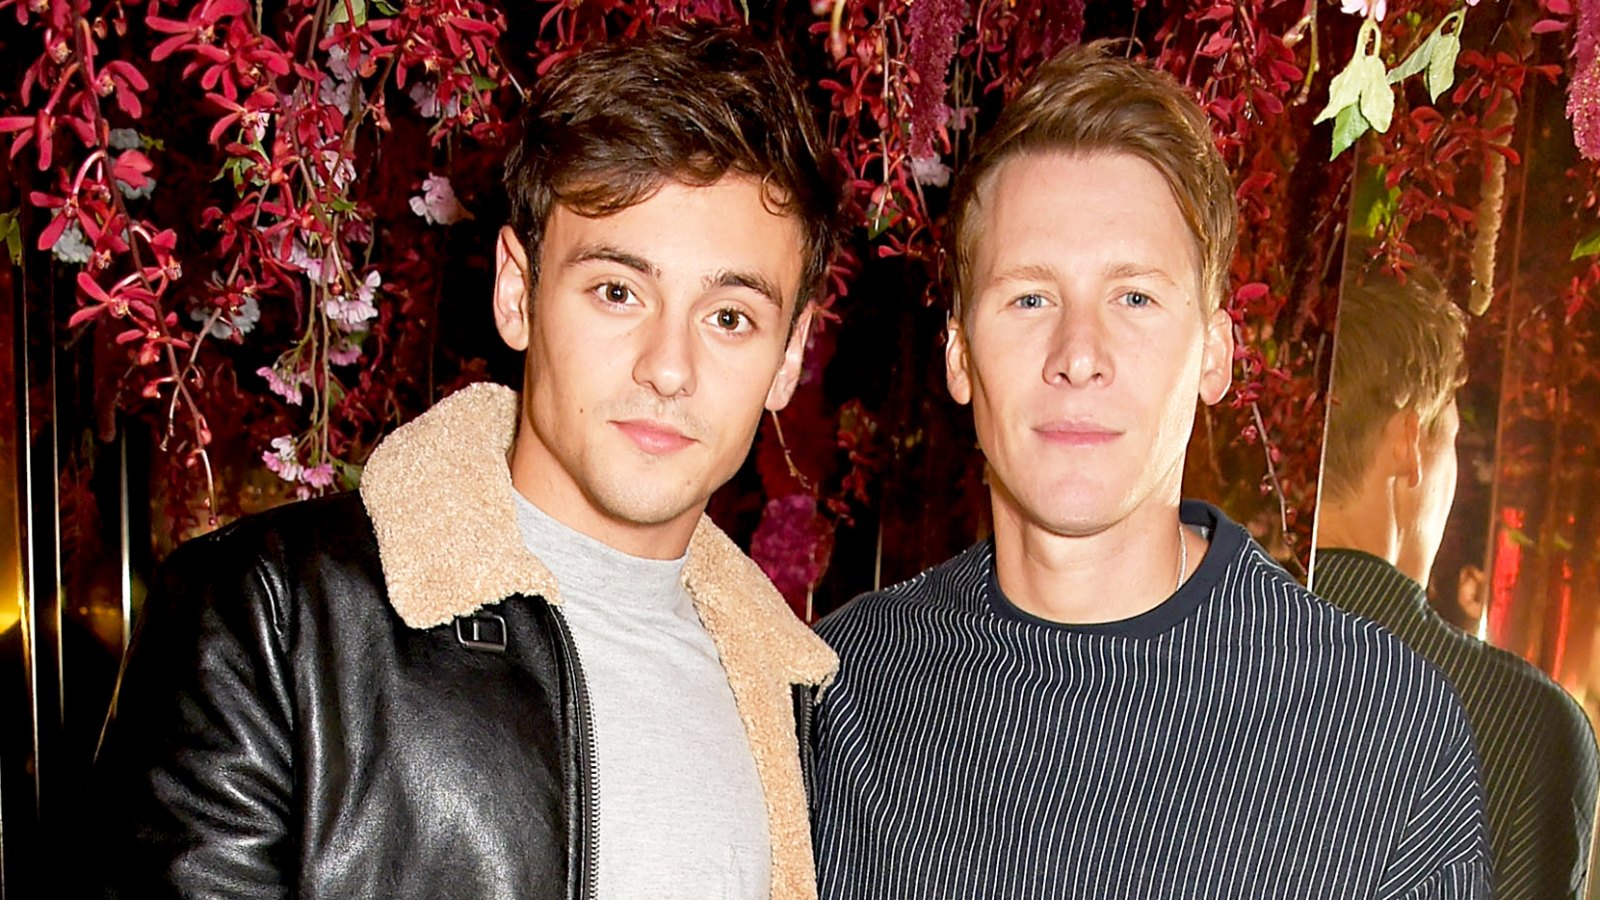 Tom Daley and Dustin Lance Black attend the 2017 Michael Kors Sexy Ruby Fragrance Launch in London, United Kingdom.